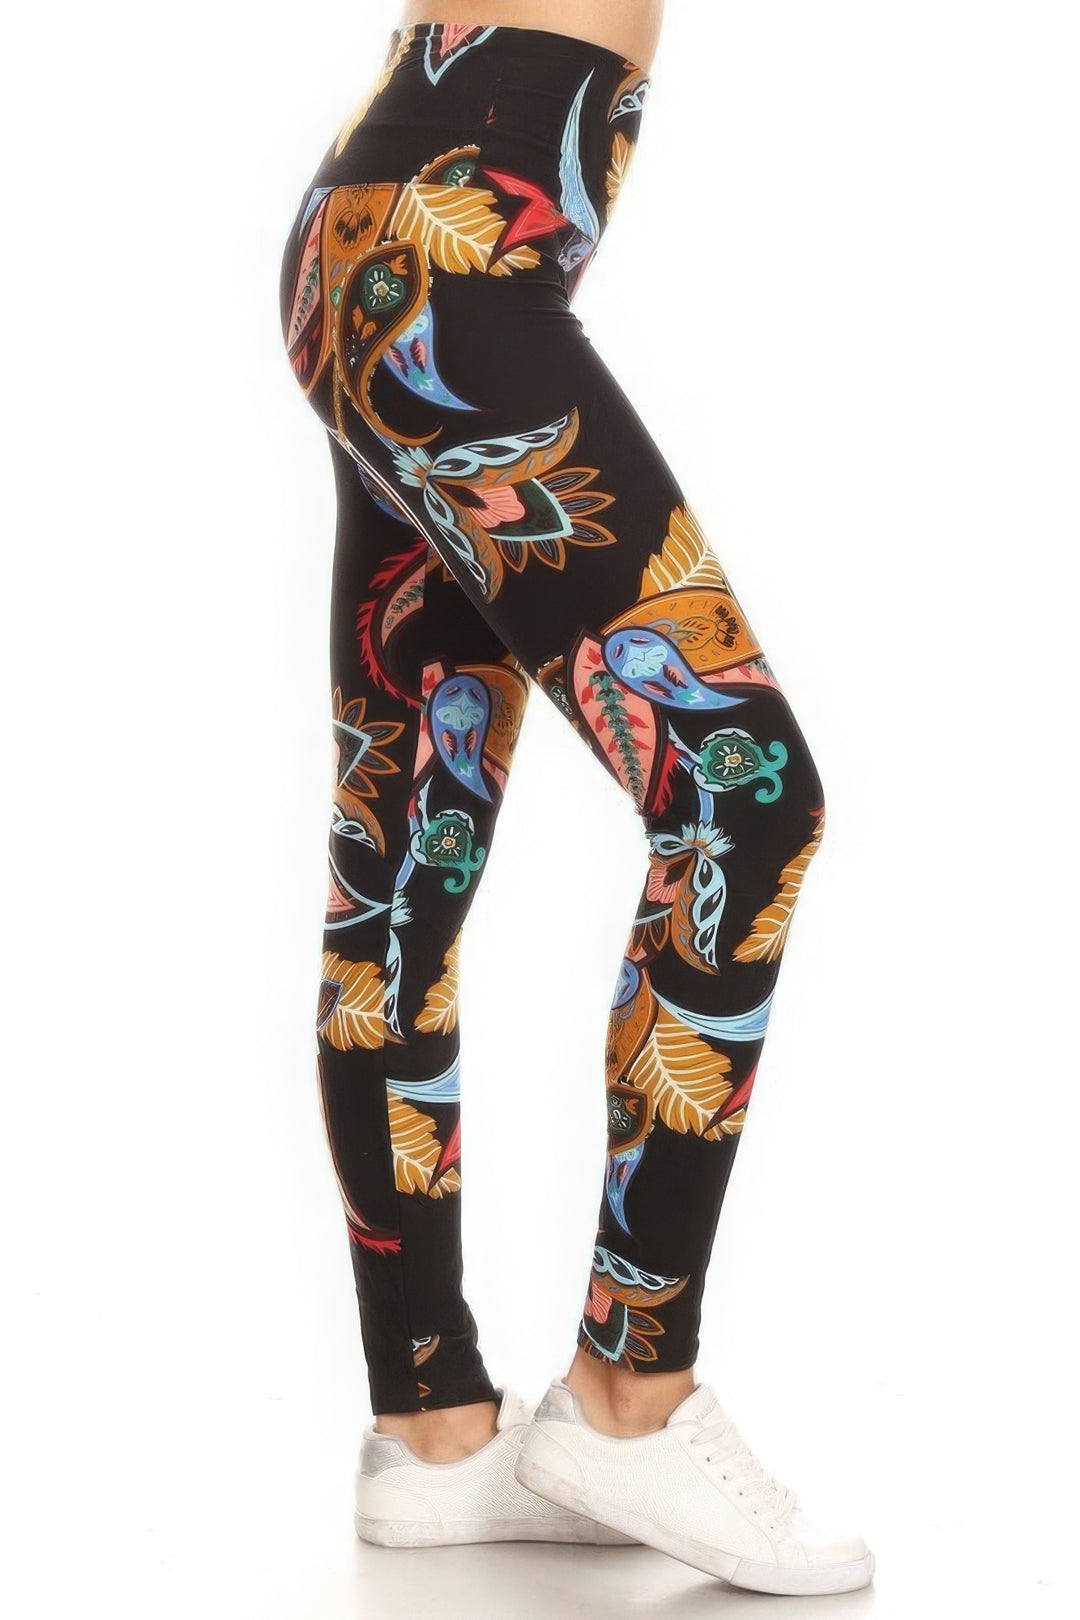 a person in black leggings with colorful flowers on them